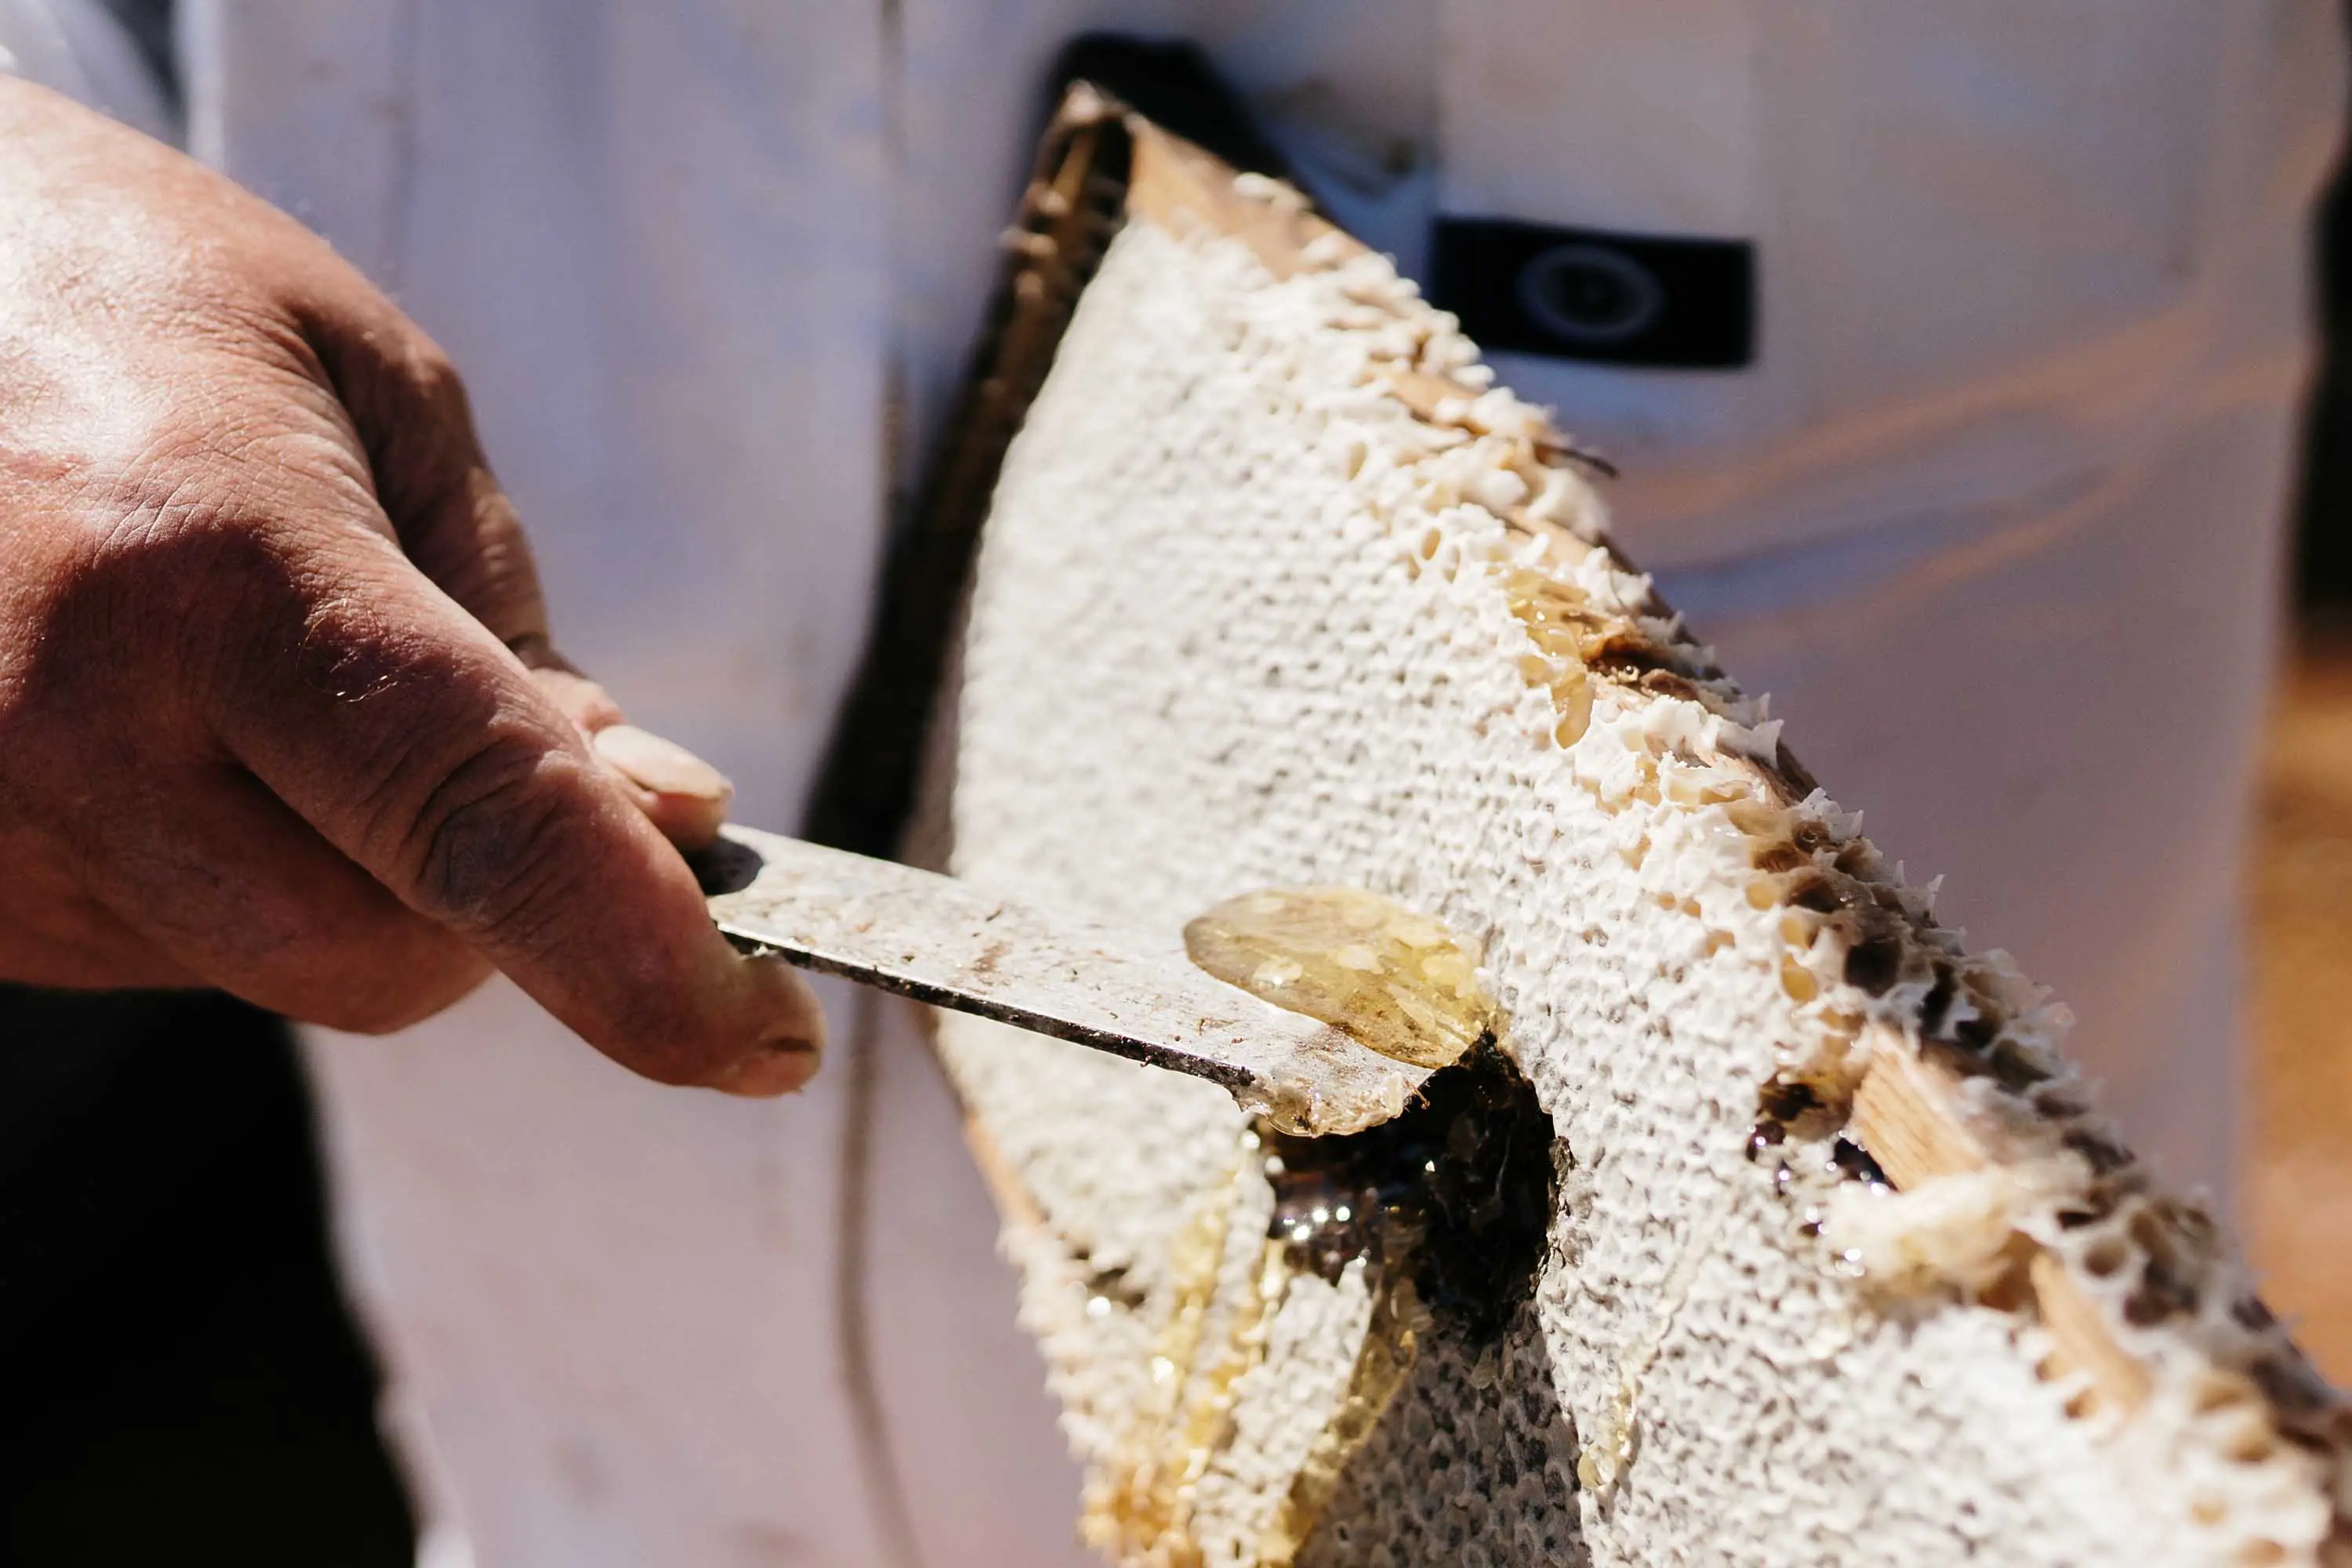 A man scrapes the surface of a honeycomb with a flat knife. Honey oozes out.